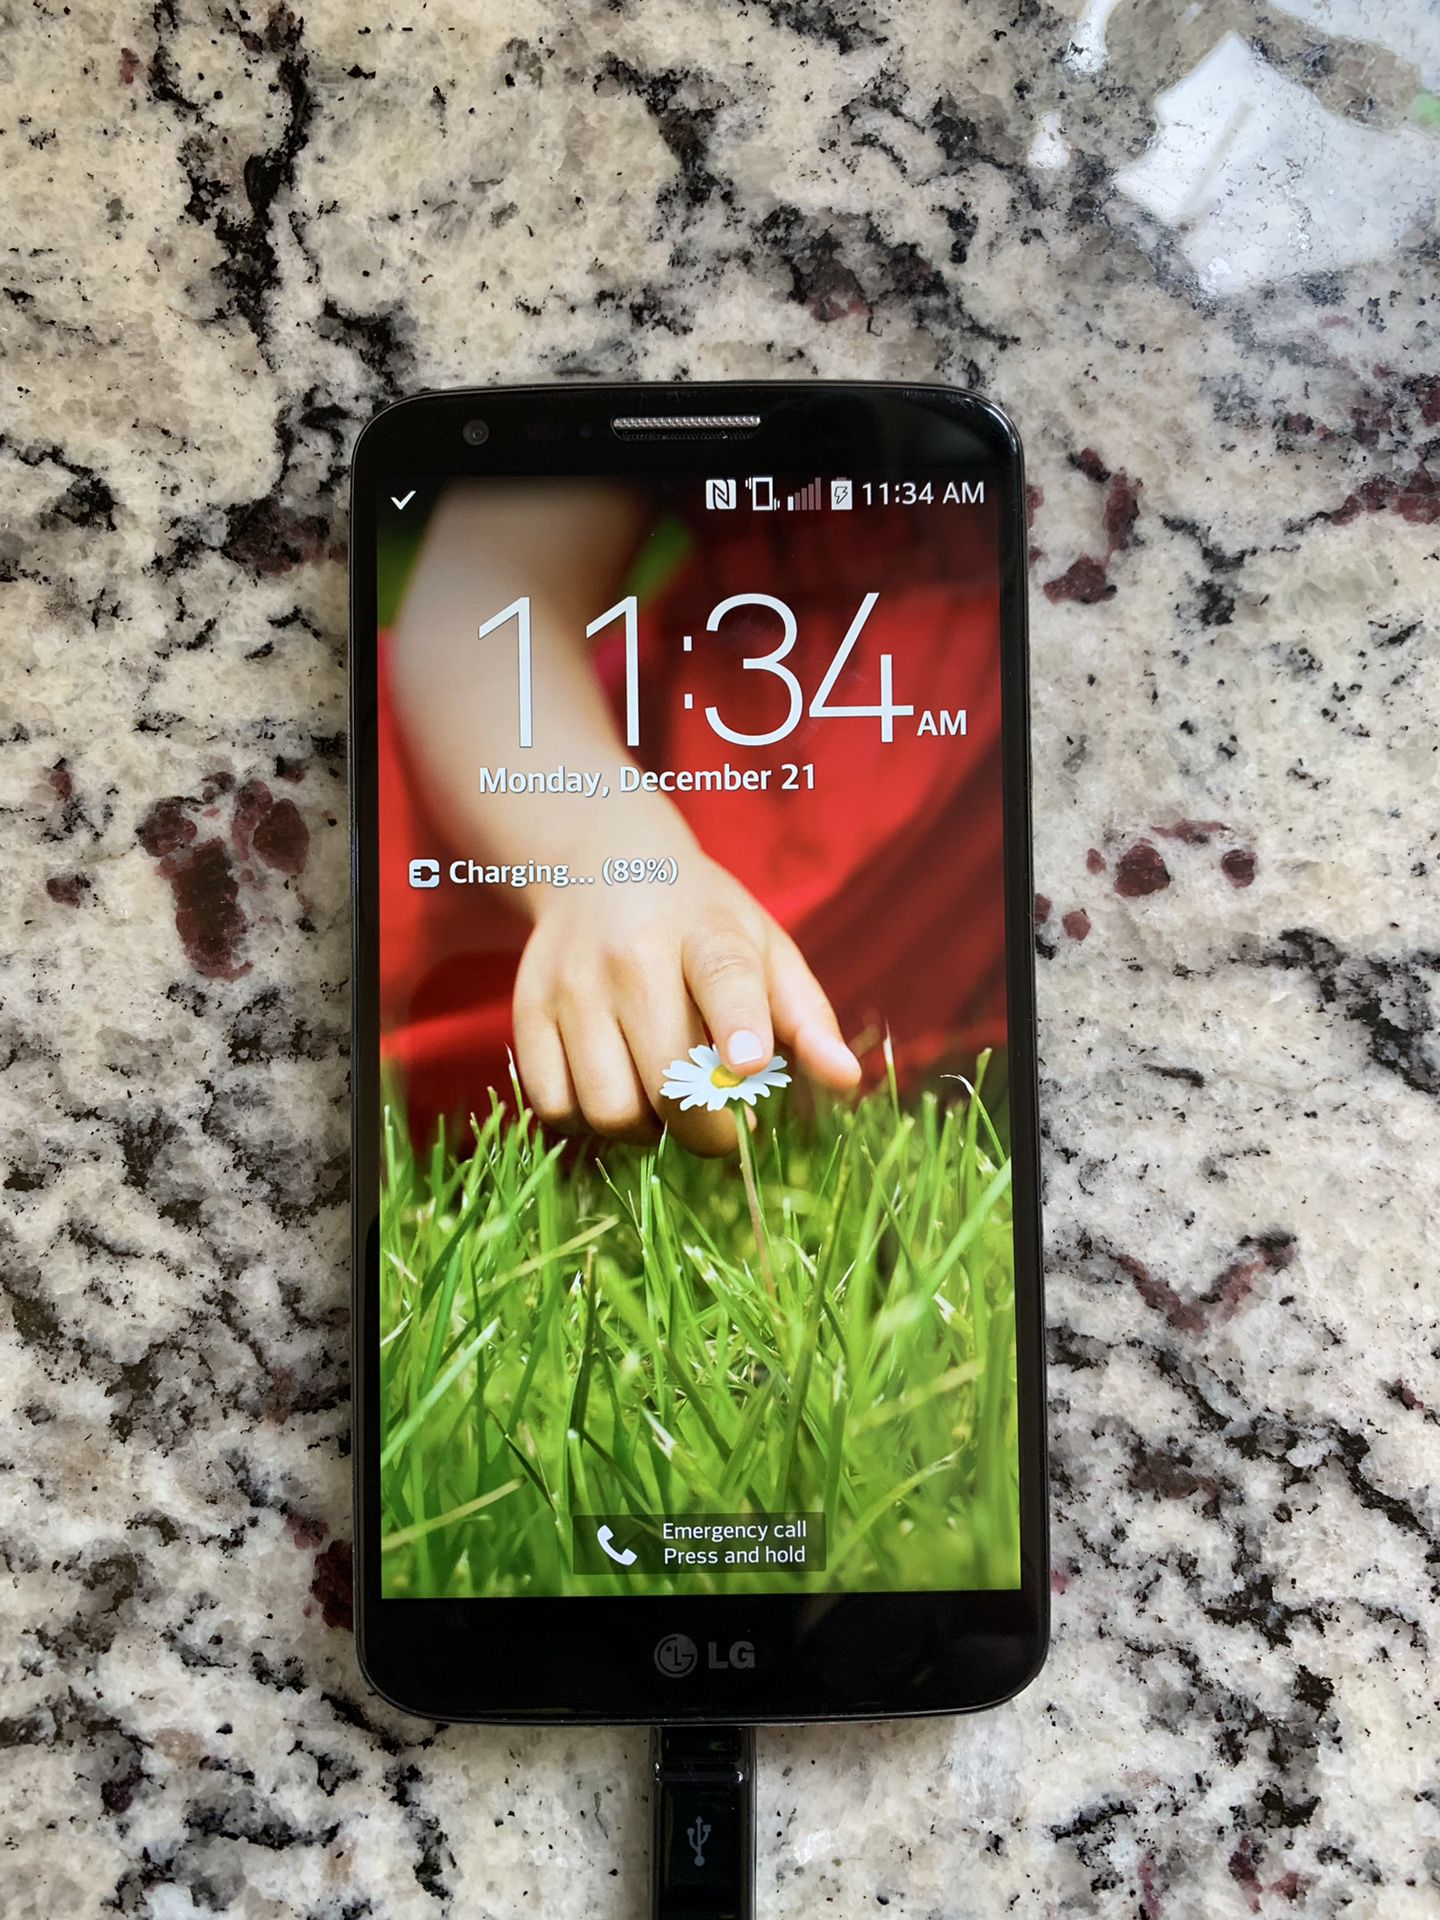 LG G2 cell phone